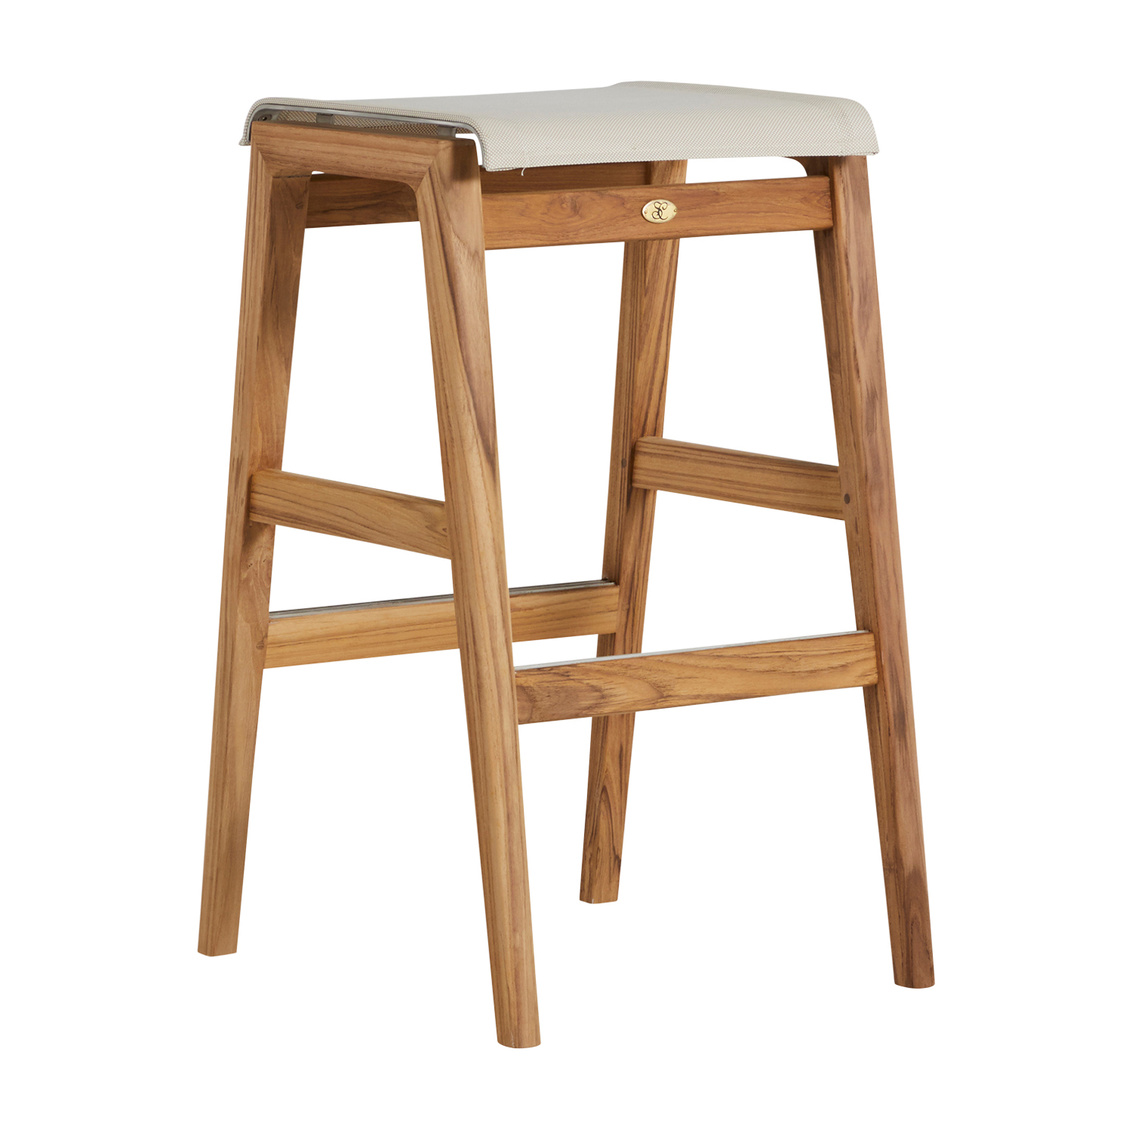 30 inch coast backless bar stool in natural teak product image